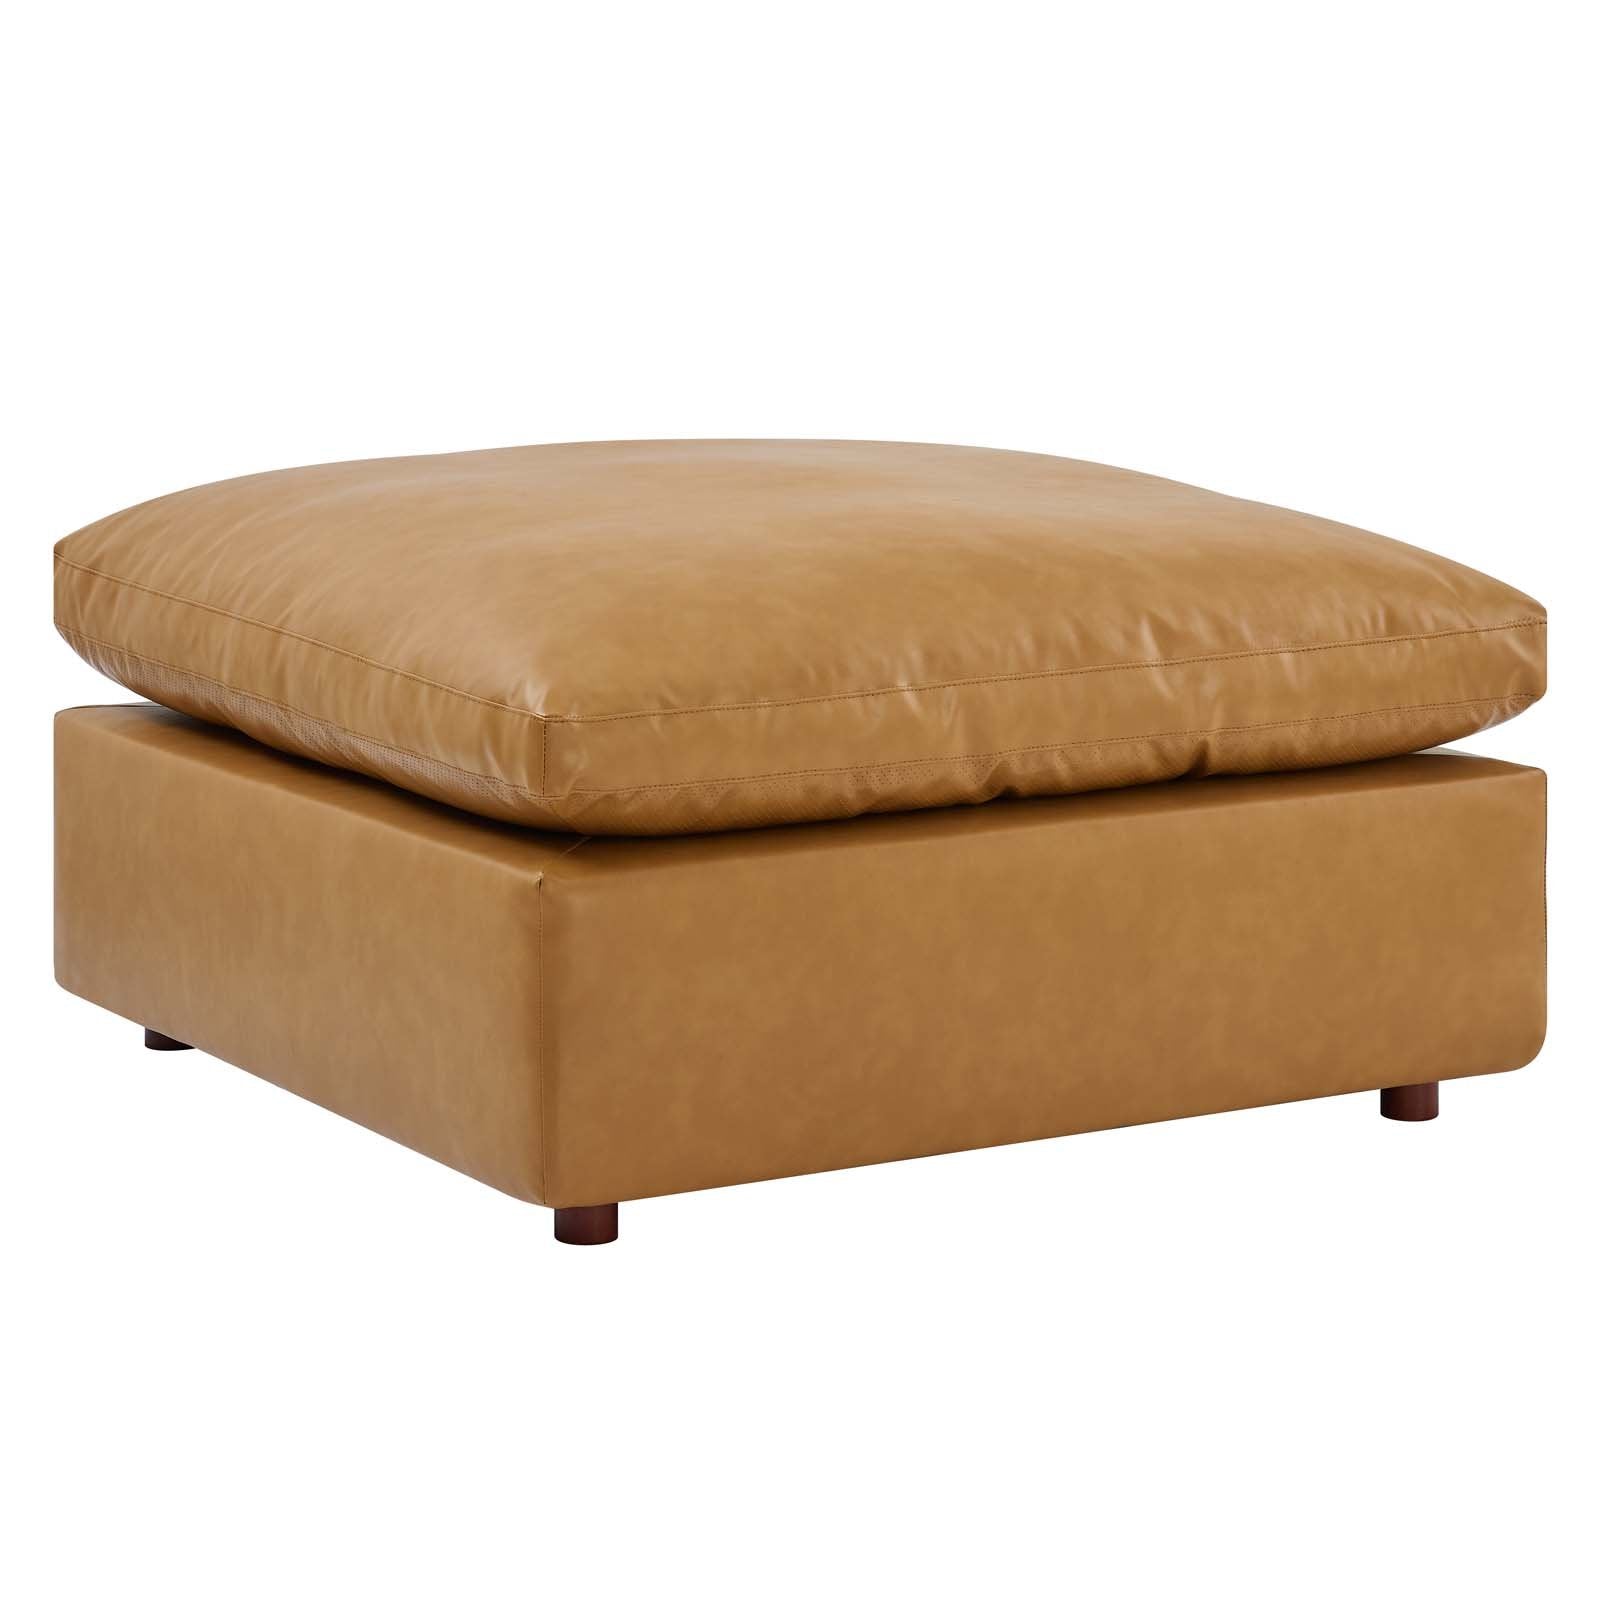 Commix Down Filled Overstuffed Vegan Leather Ottoman